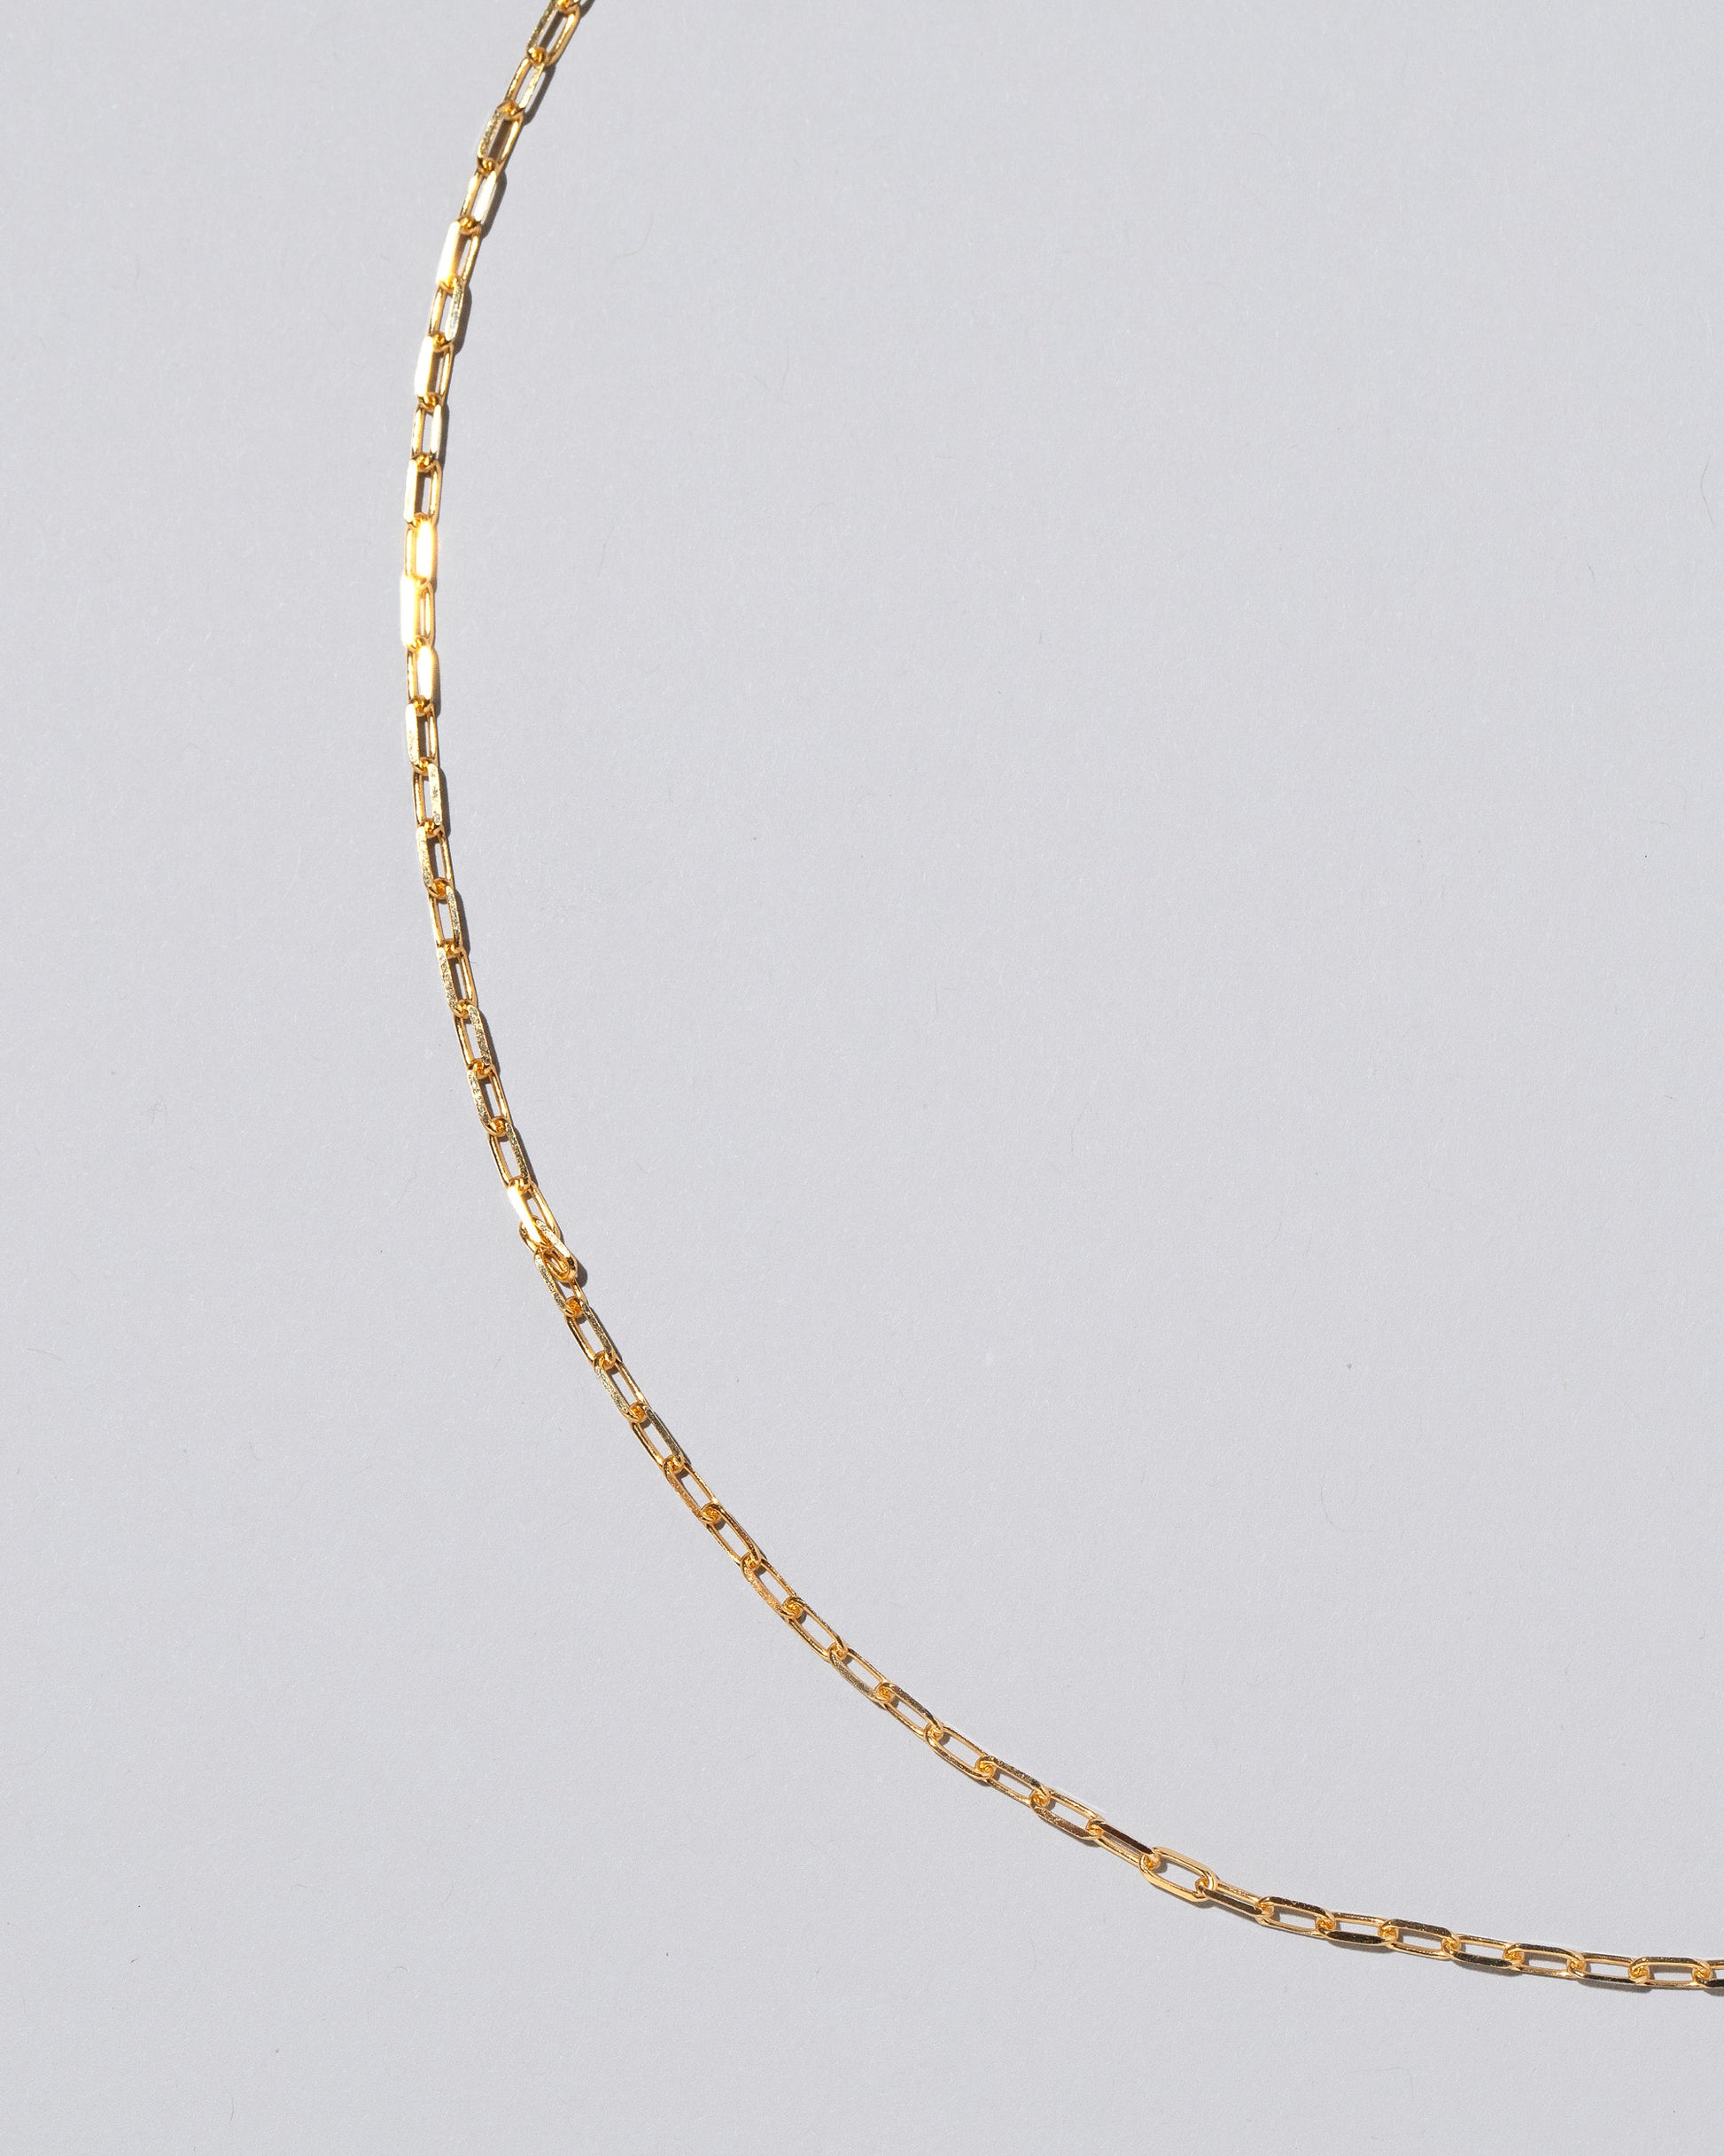 Closeup detail of the 2.2mm Lightweight Beveled Oval Chain Necklace on light color background.